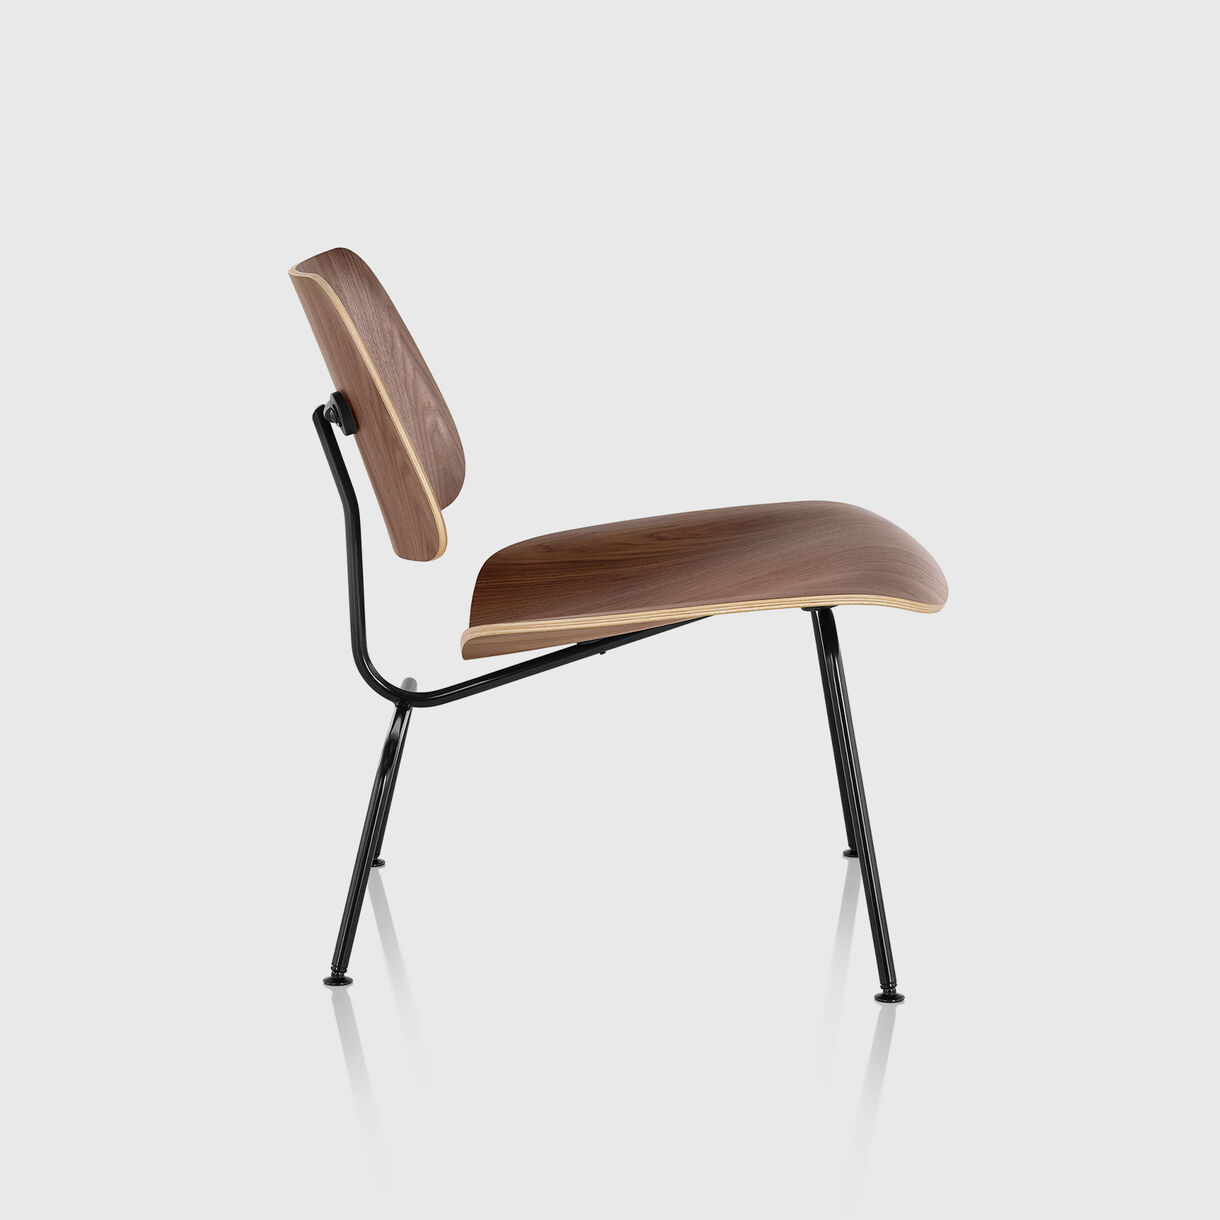 Eames Moulded Plywood Lounge Chair, Metal Base, Walnut & Black